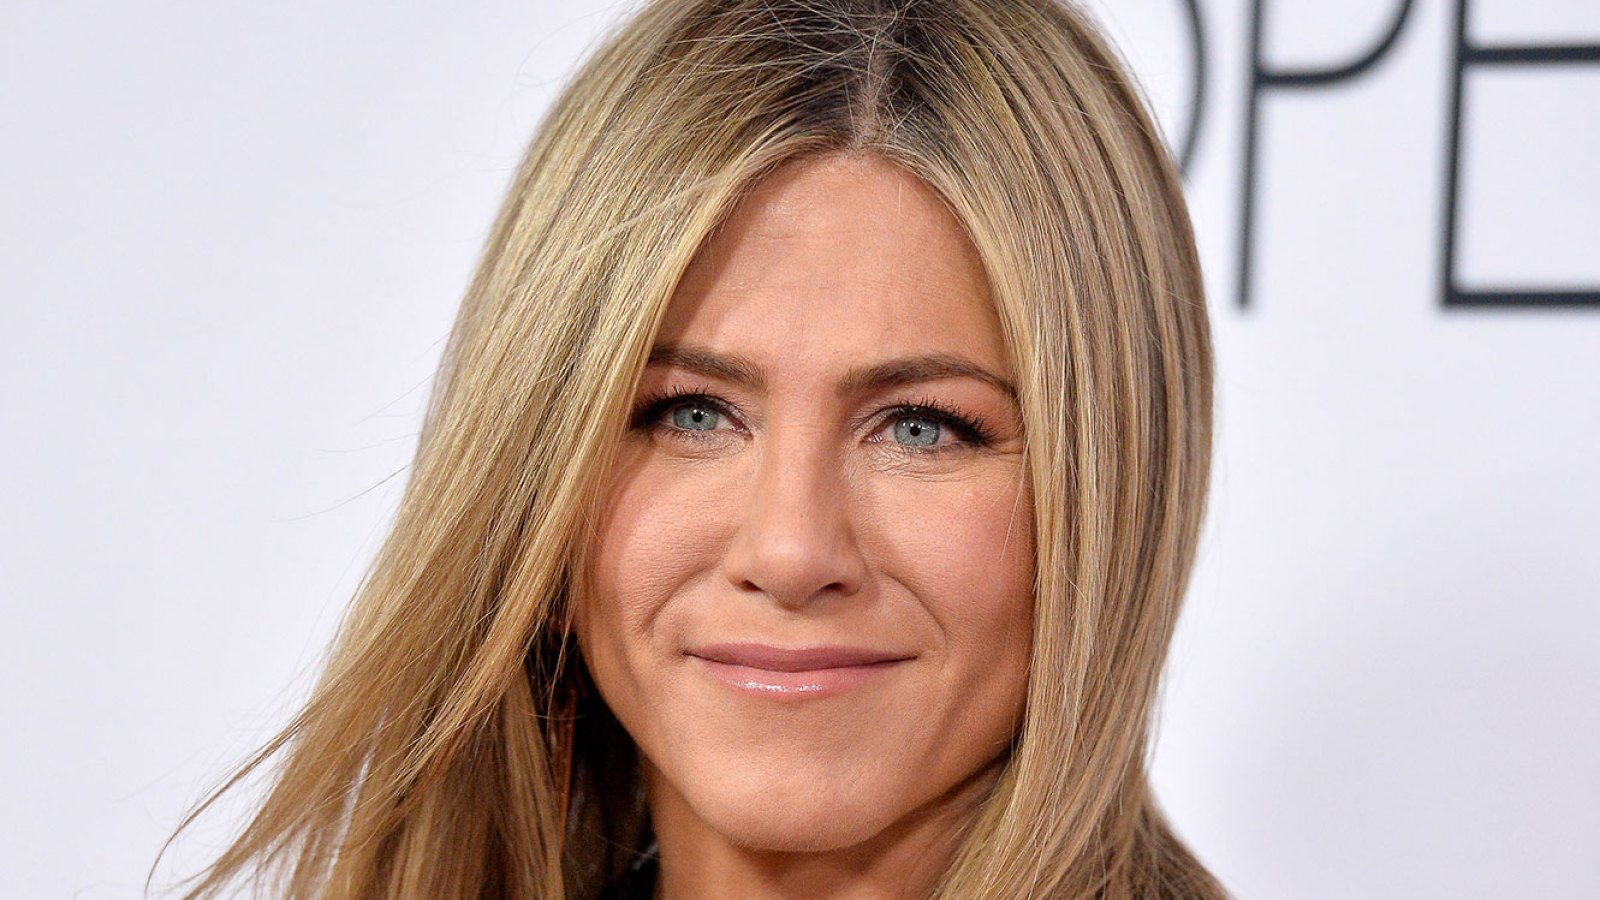 See How Jennifer Aniston’s Face Has Changed Through the Years, From 1990 to Today